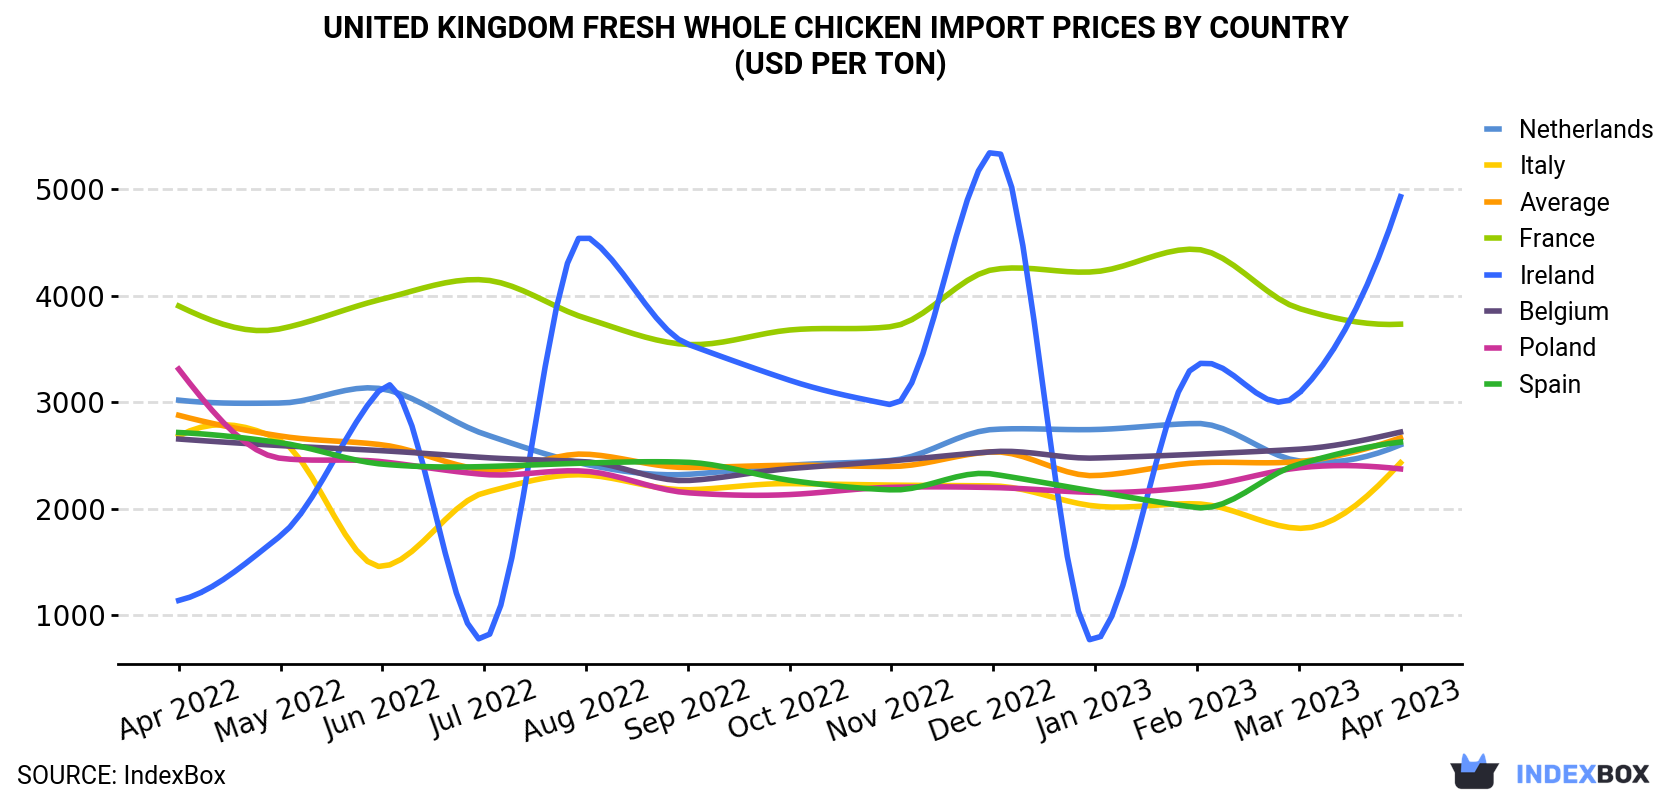 United Kingdom Fresh Whole Chicken Import Prices By Country (USD Per Ton)